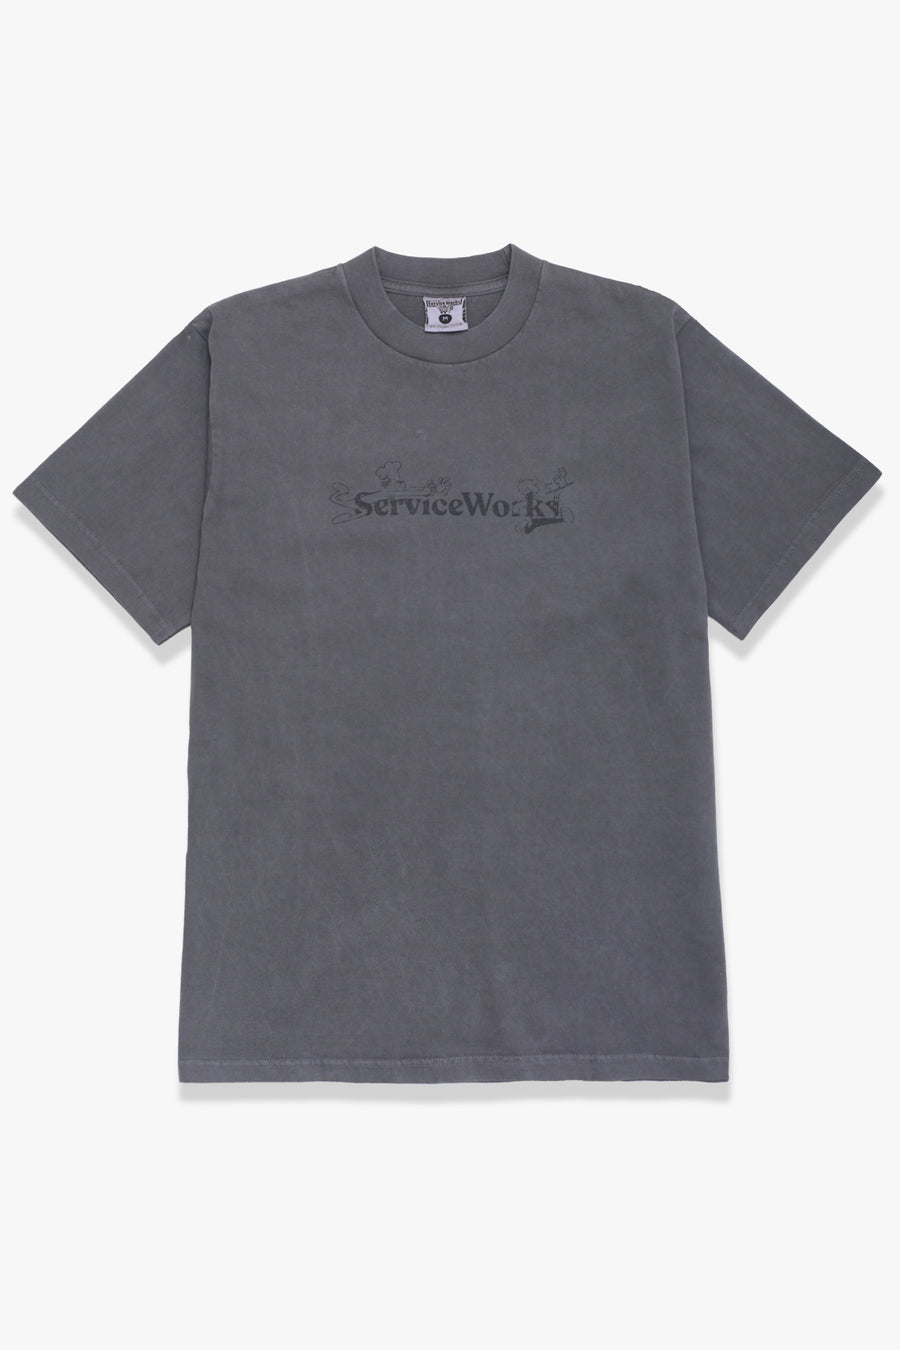 Chase T-Shirt (Charcoal)